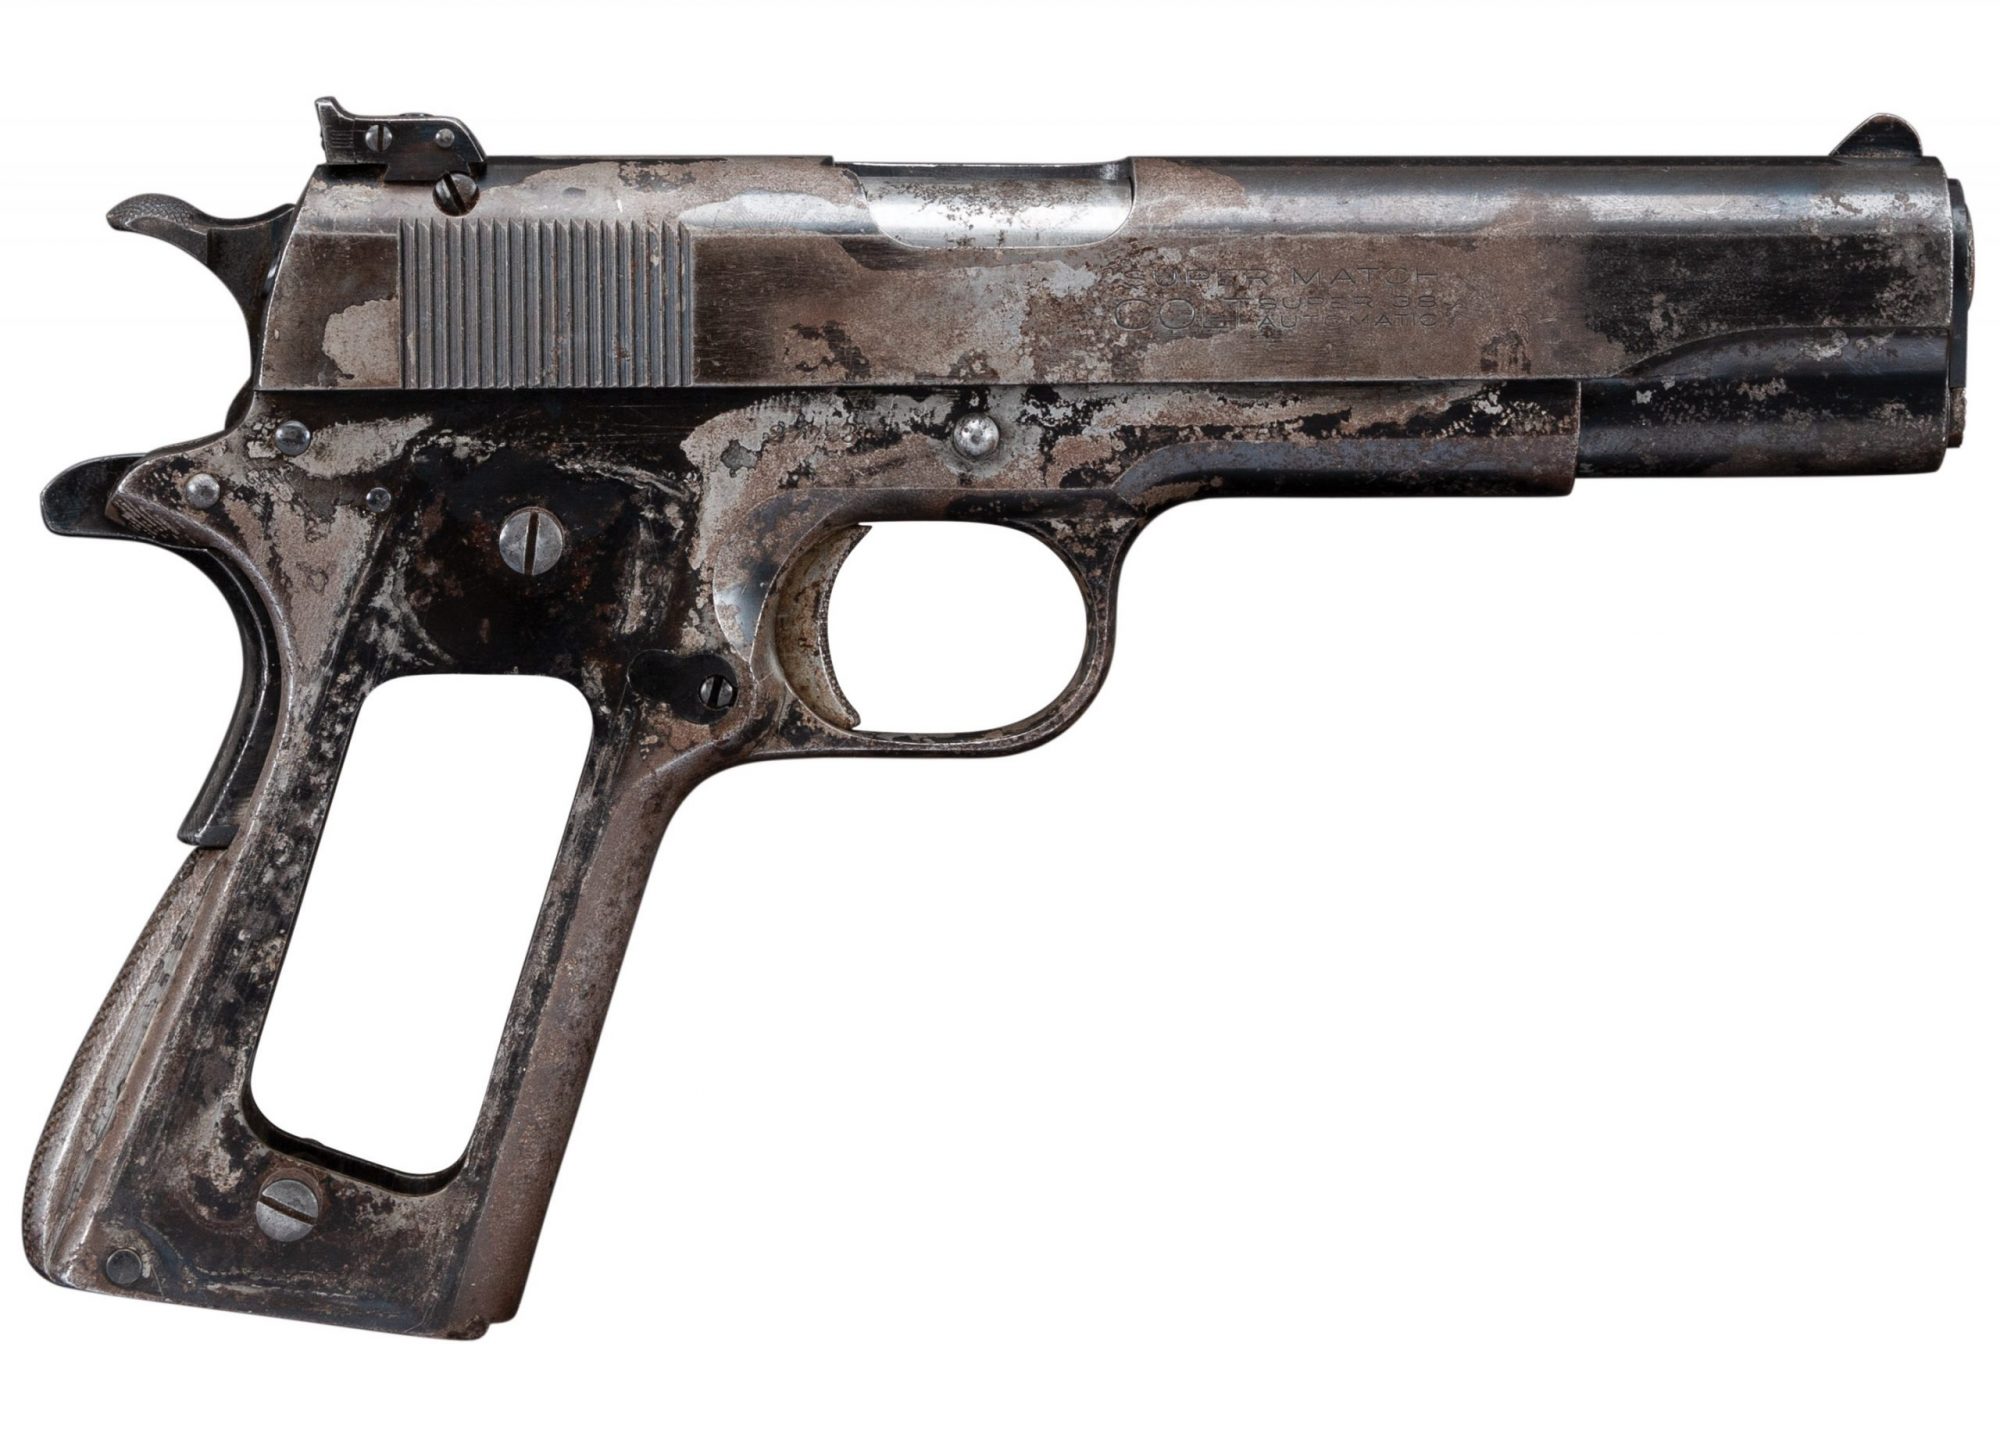 Photo of a Colt Super Match .38 Super Automatic pistol before restoration by Turnbull Restoration of Bloomfield, NY